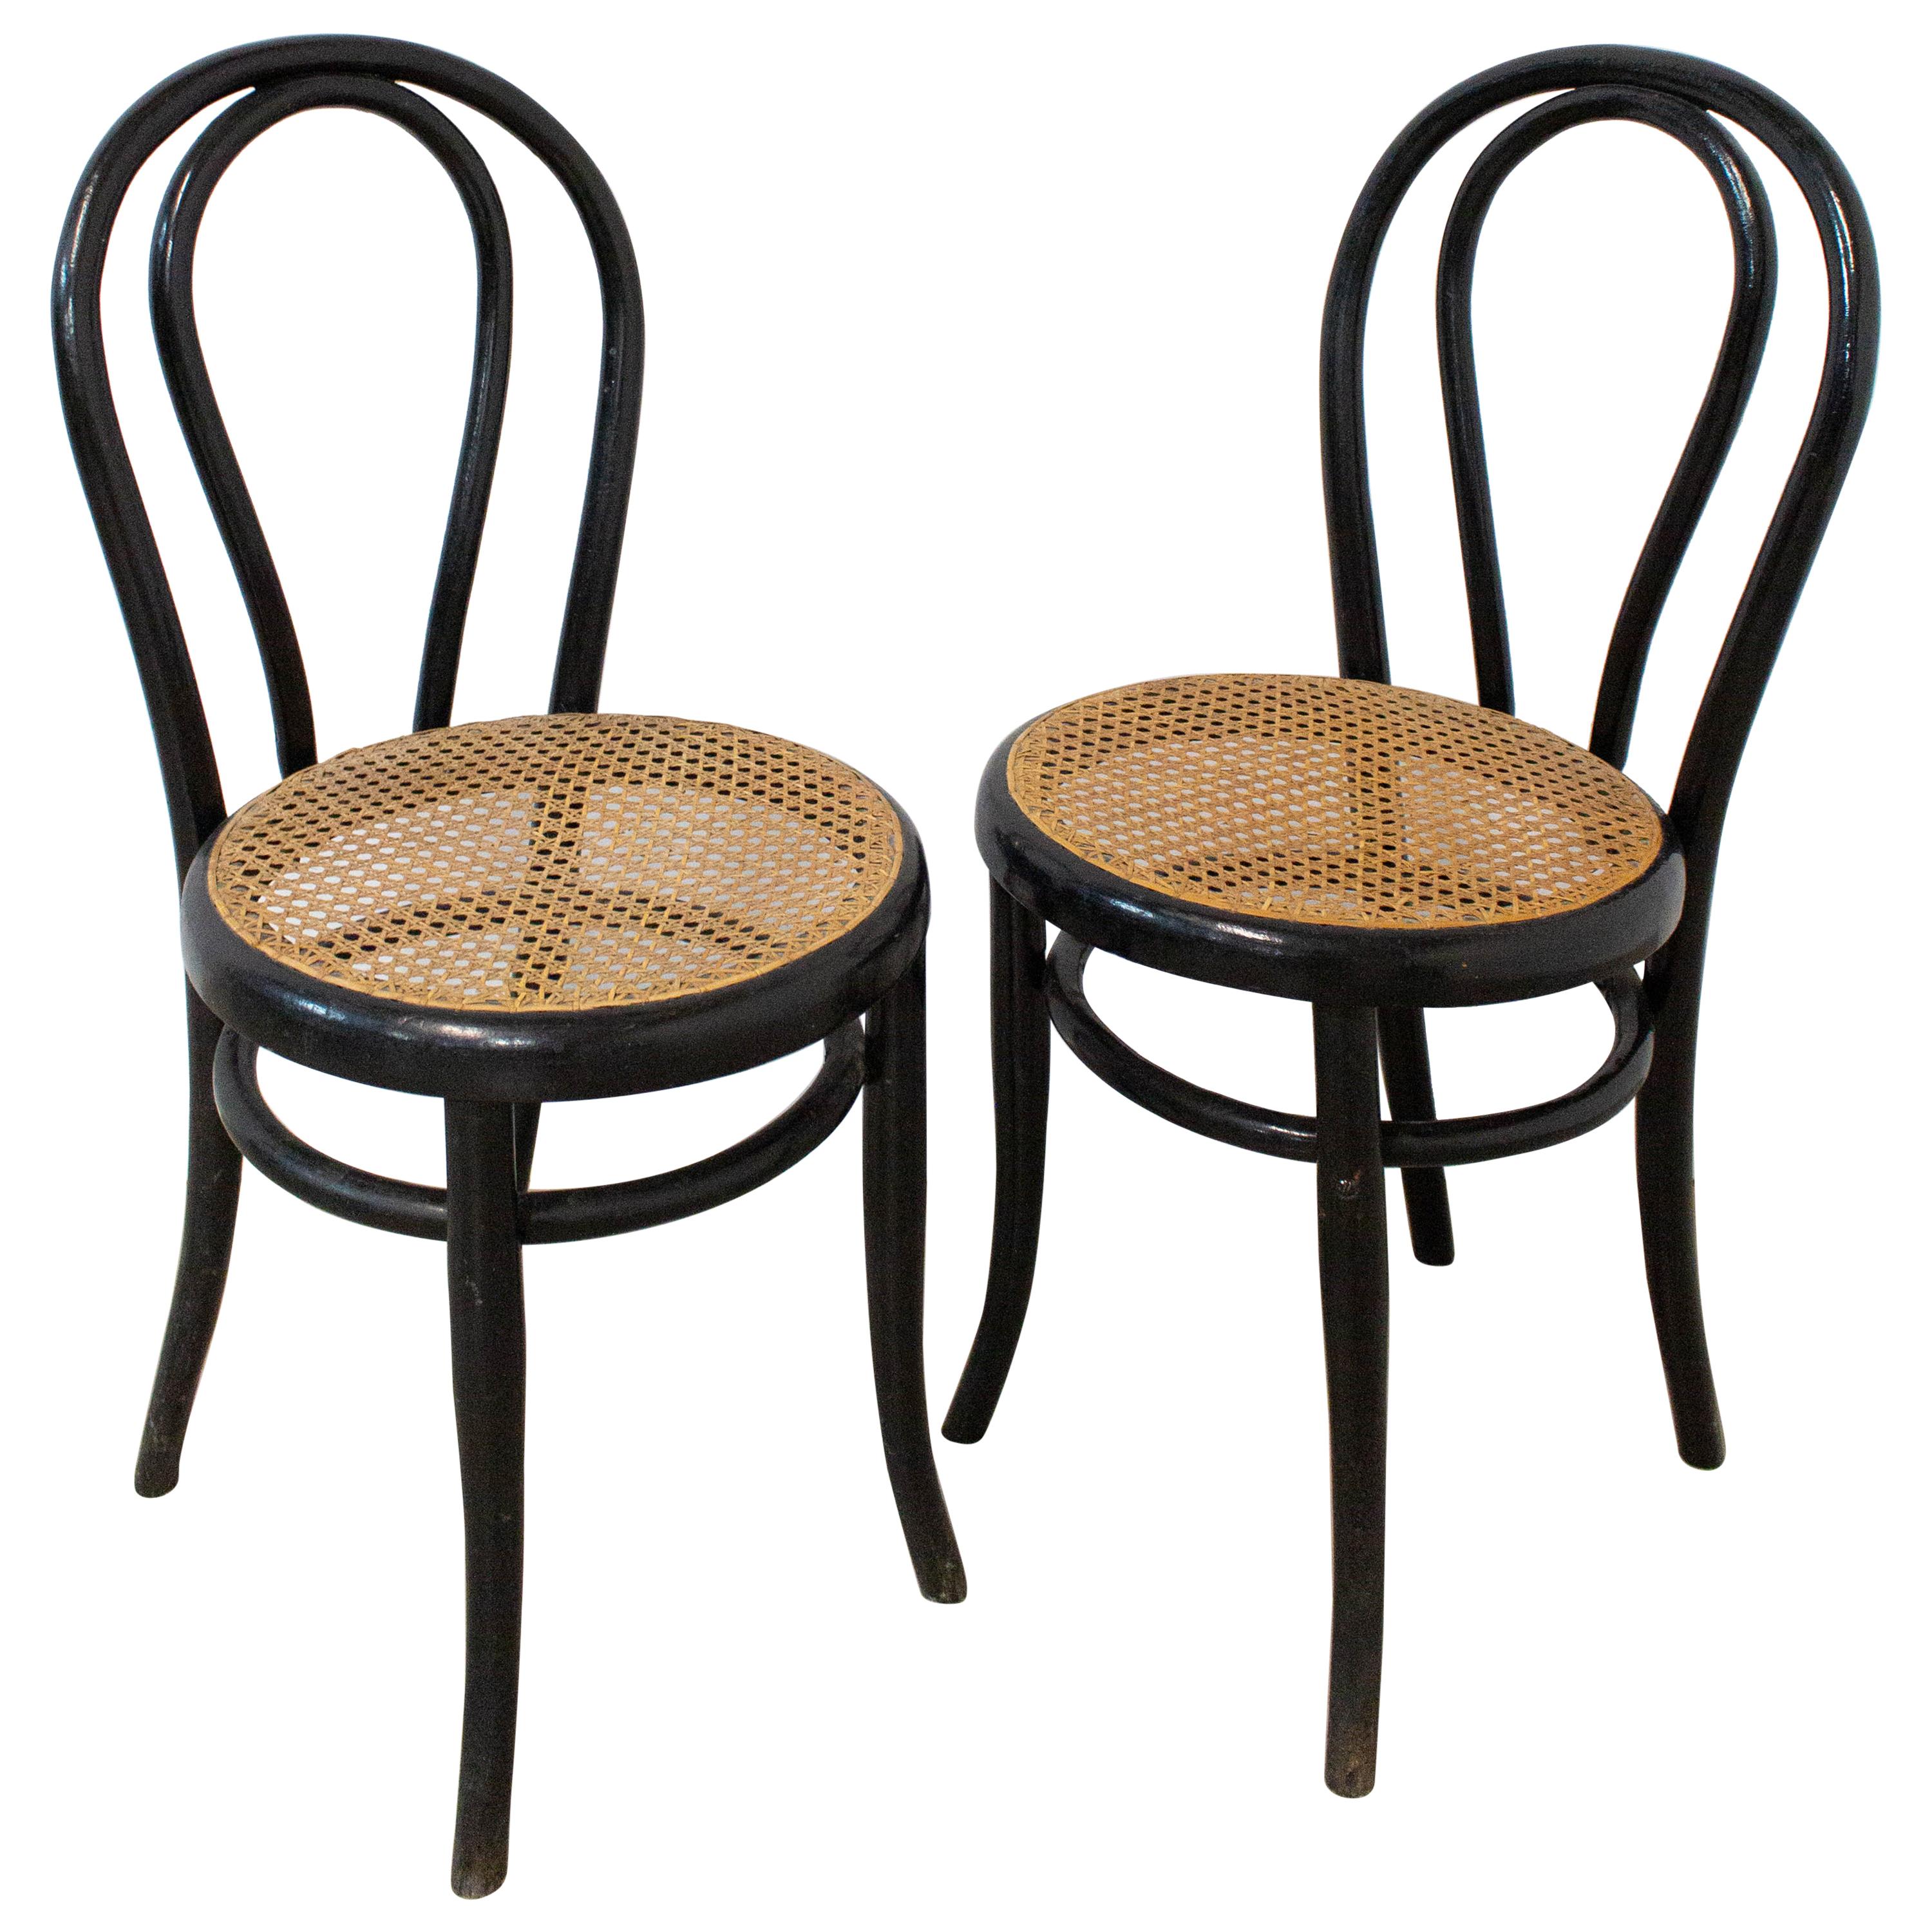 Bistro Caned Dining Chairs Fischel Thonet Style, France, Late 19th Century, Pair